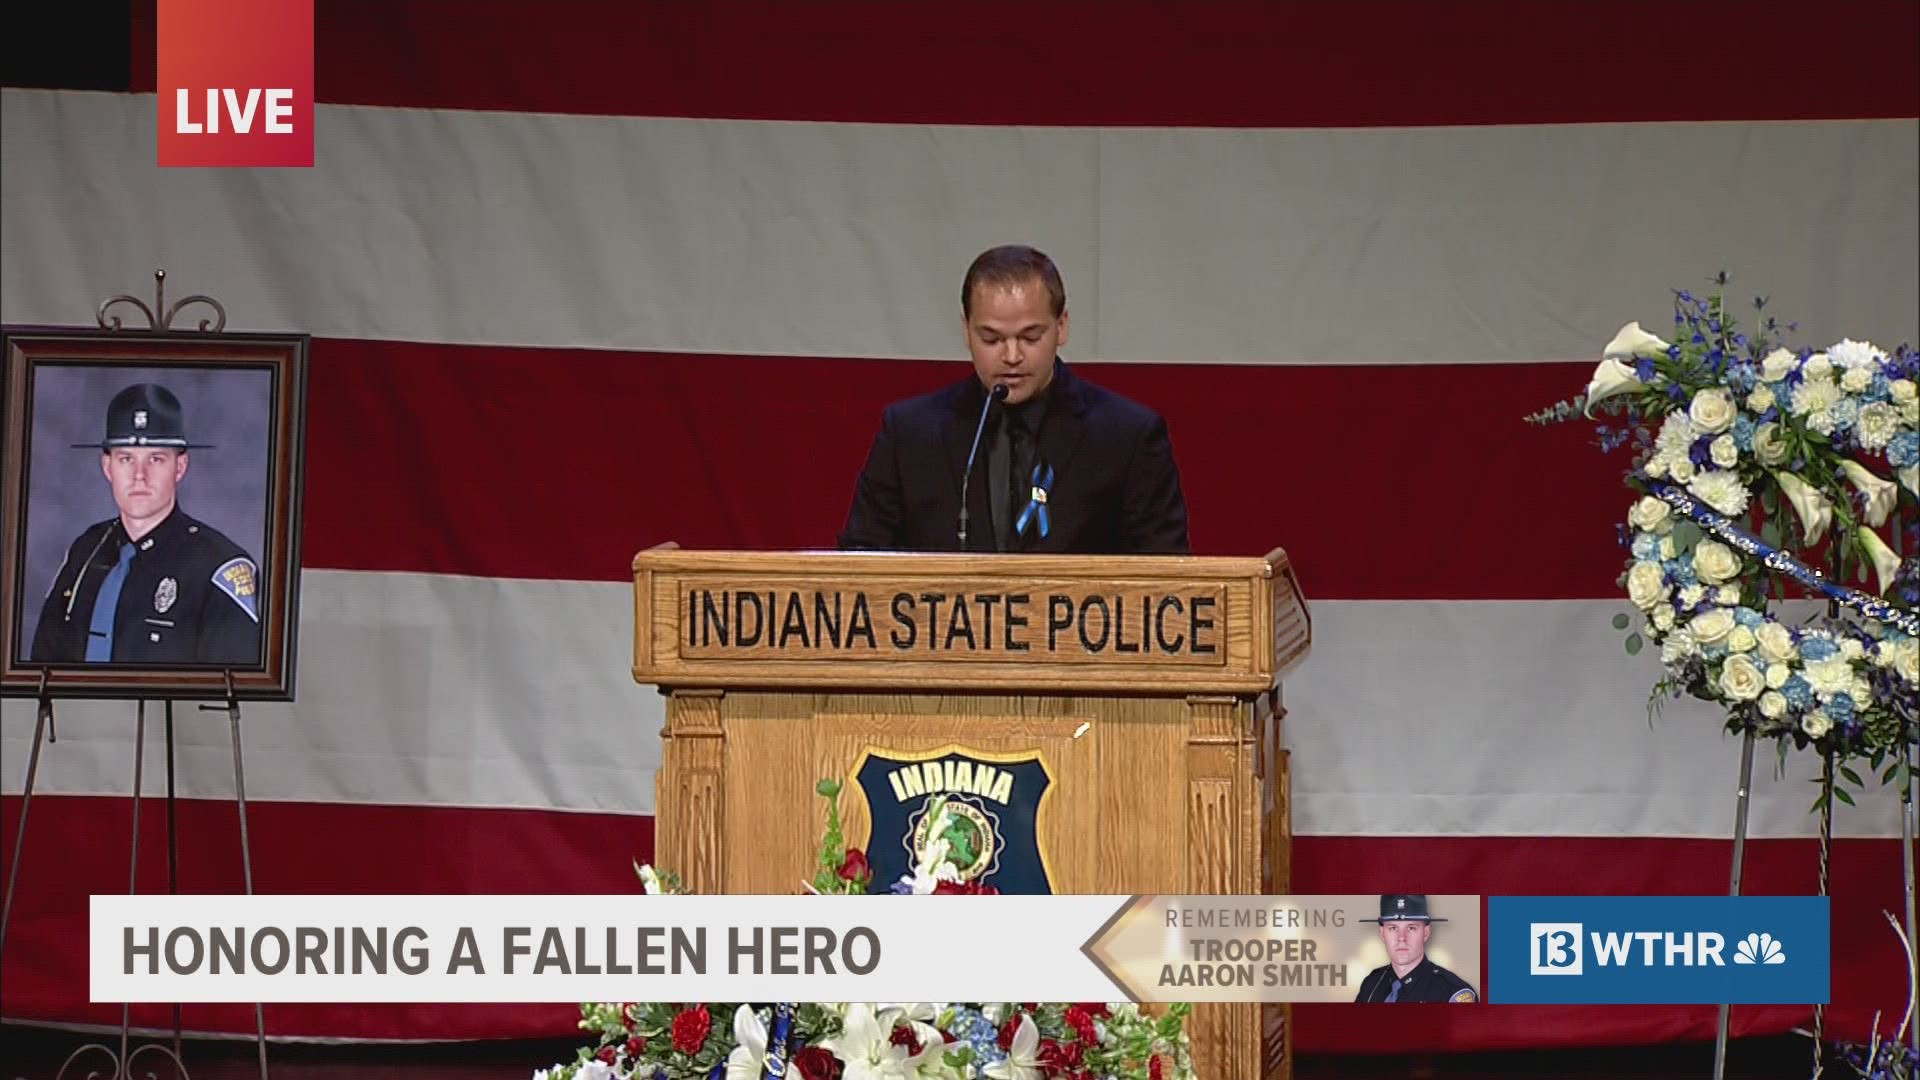 Pastor Christopher Marlin reads a letter from Tony Marlin, the uncle of fallen ISP Trooper Aaron Smith.